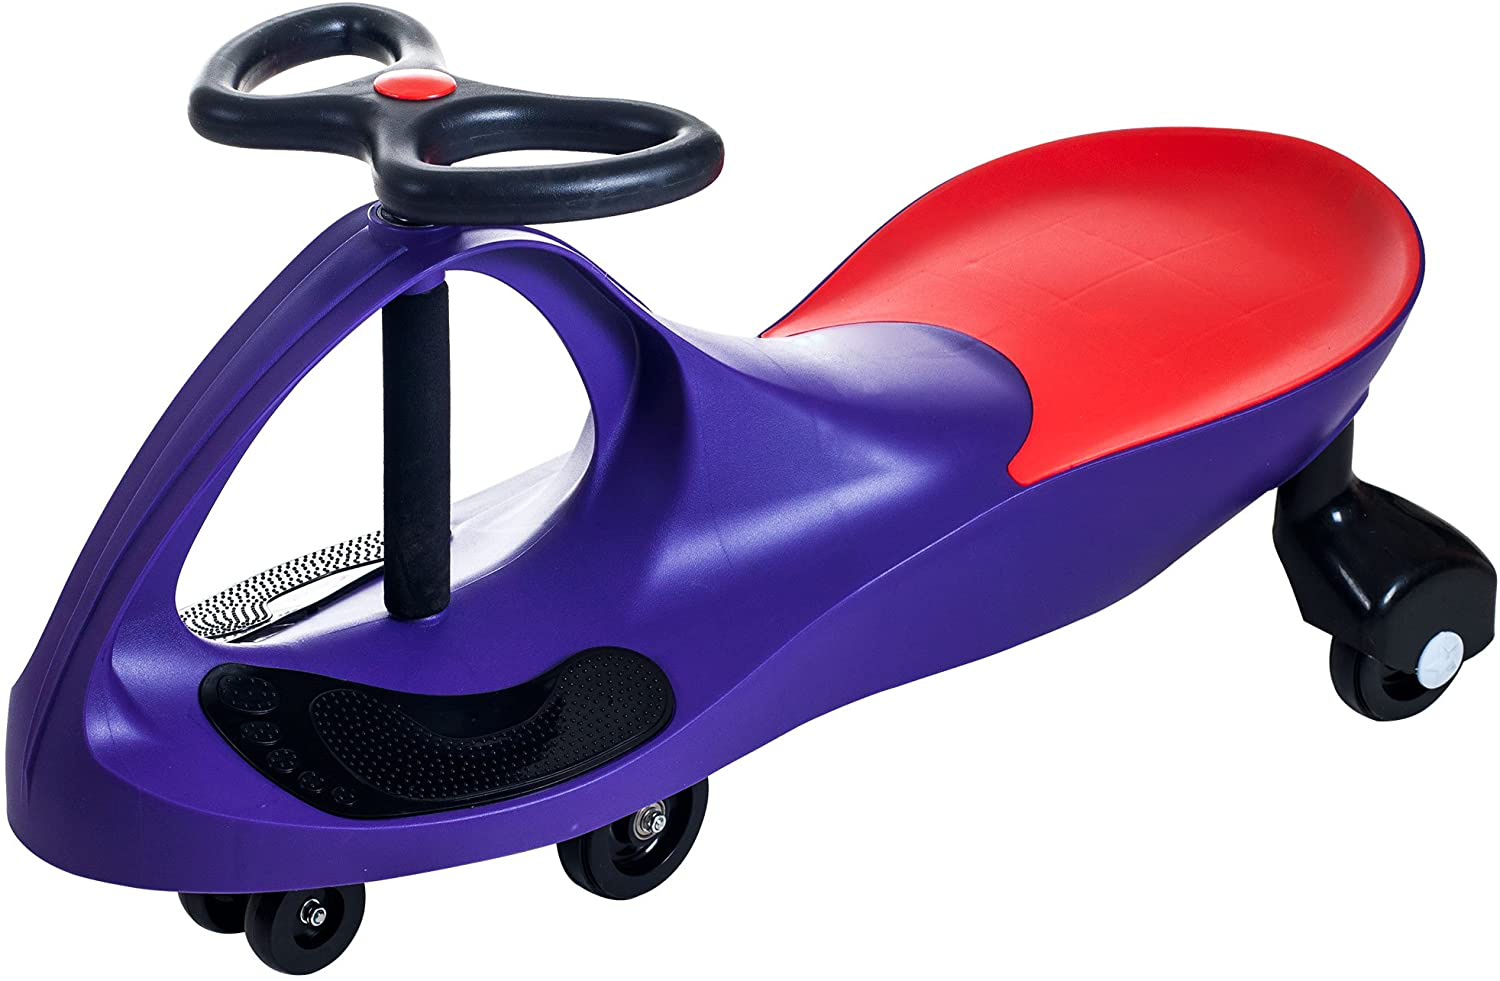 Wiggle Car Ride On Toy – No Batteries, Gears or Pedals – Twist, Swivel, Go – Outdoor Ride Ons for Kids 3 Years and Up by Lil’ Rider